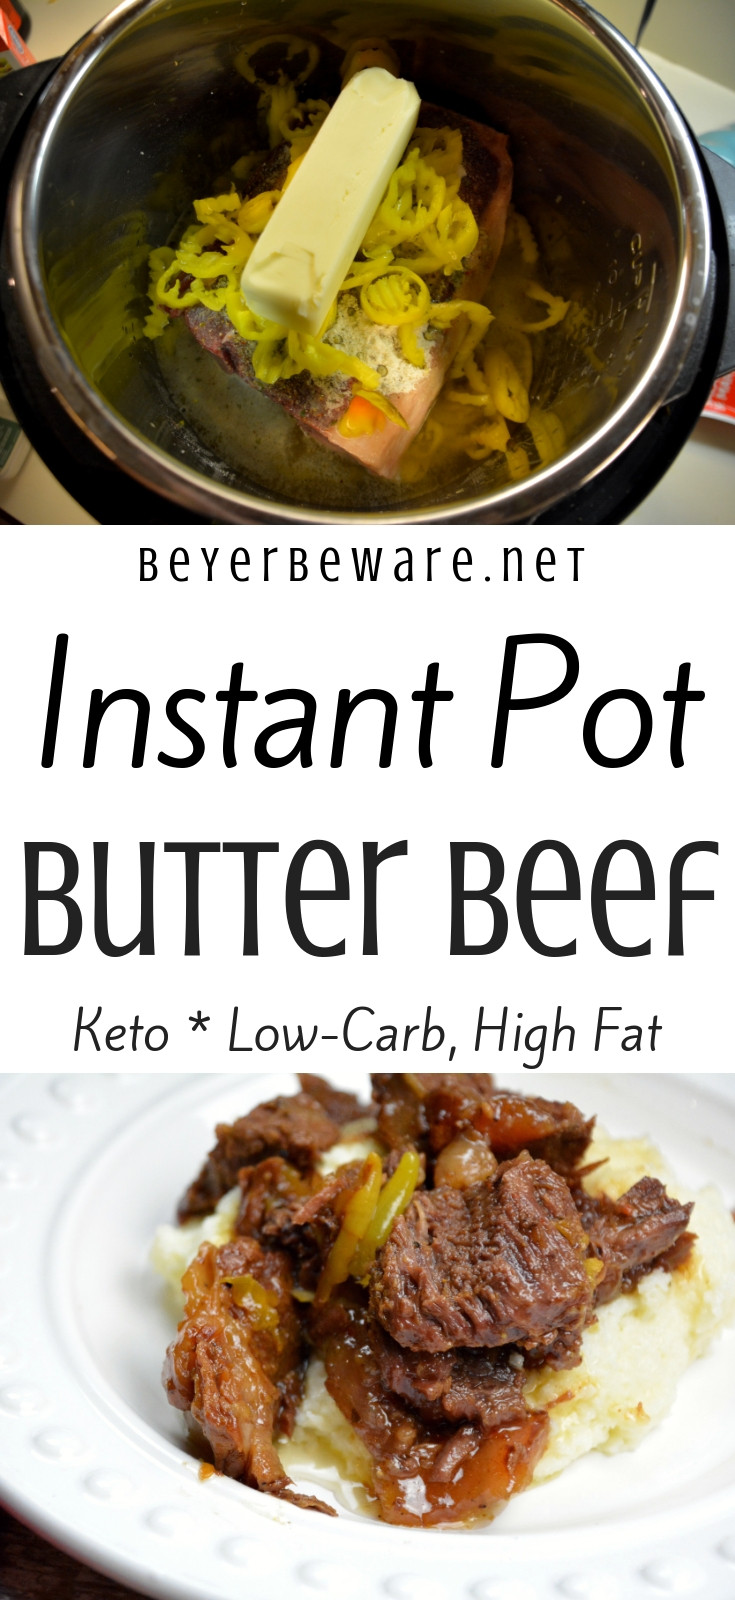 Beef Keto Recipes
 Instant Pot Butter Beef Keto Low Carb Recipe Beyer Beware